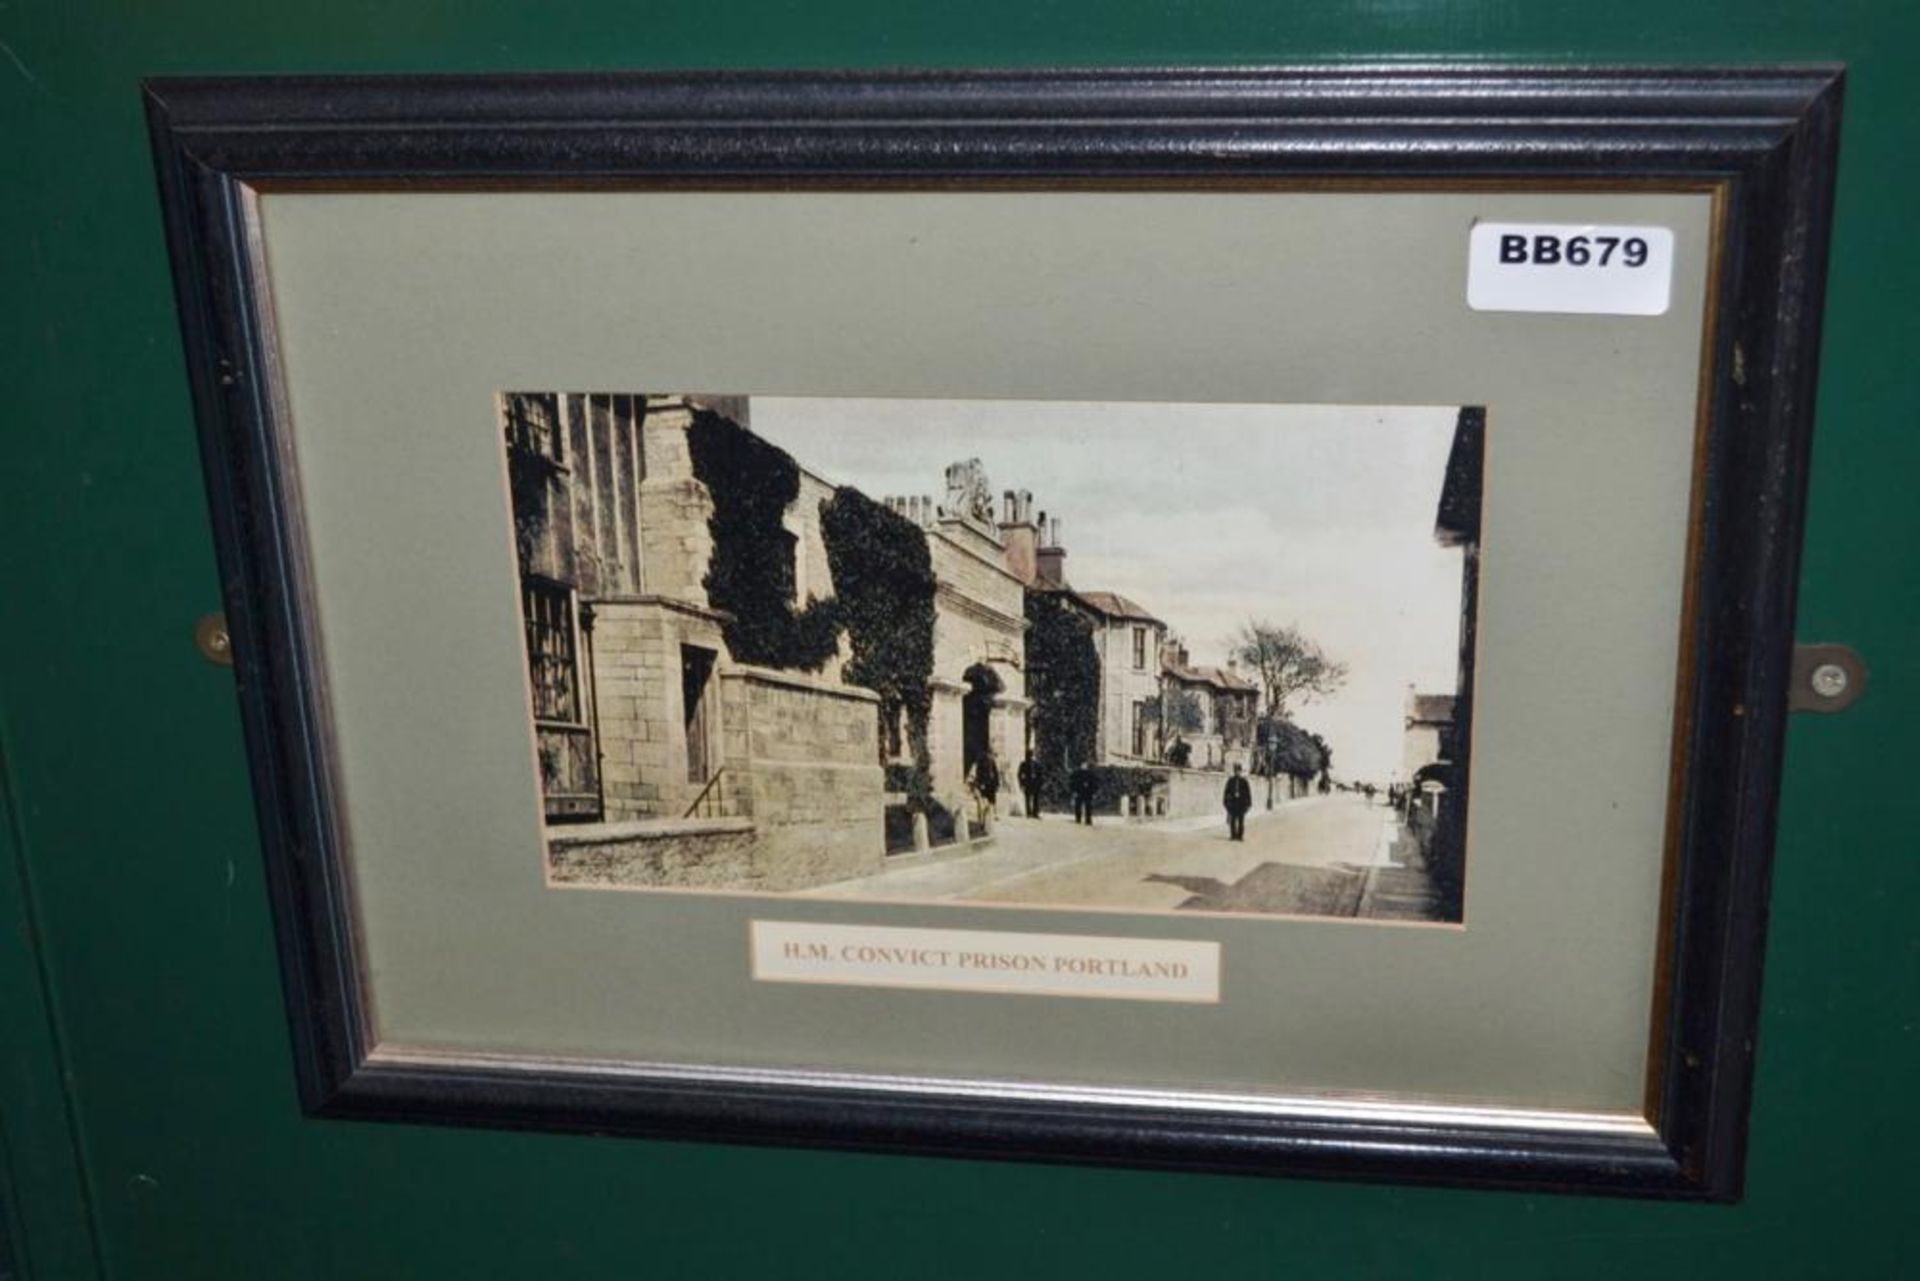 1 x Framed Picture of H.M. Convict Prison Portland - 44 x 34 cms - Ref BB679 GF - CL351 - Location: